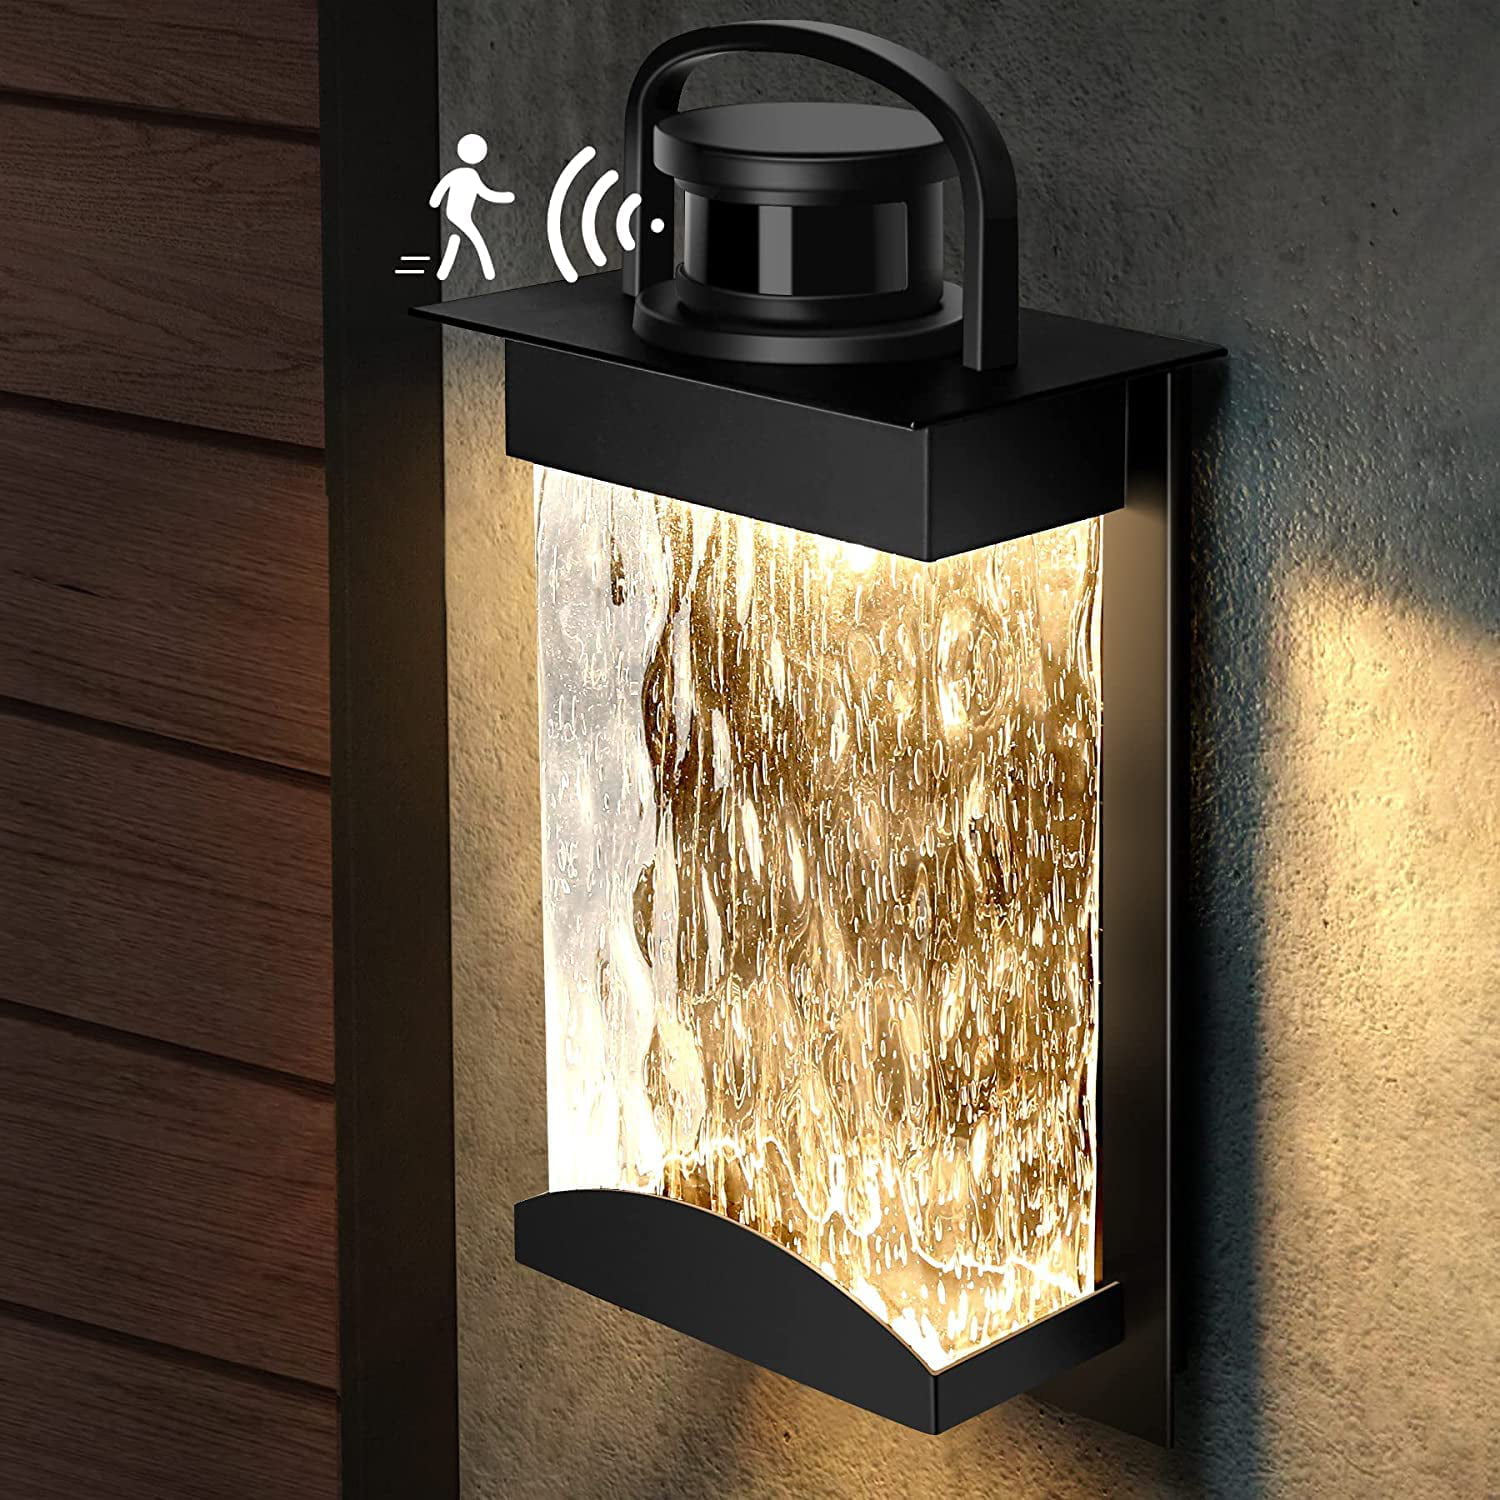 Motion Sensor Outdoor Lights, Lighting Modes LED Integrated Porch Lights,  1200 Lumen Dusk to Dawn Outside Wall Light with Seeded Glass, 13W Modern Exterior  Light Fixture,3000K Wall Sconce for House